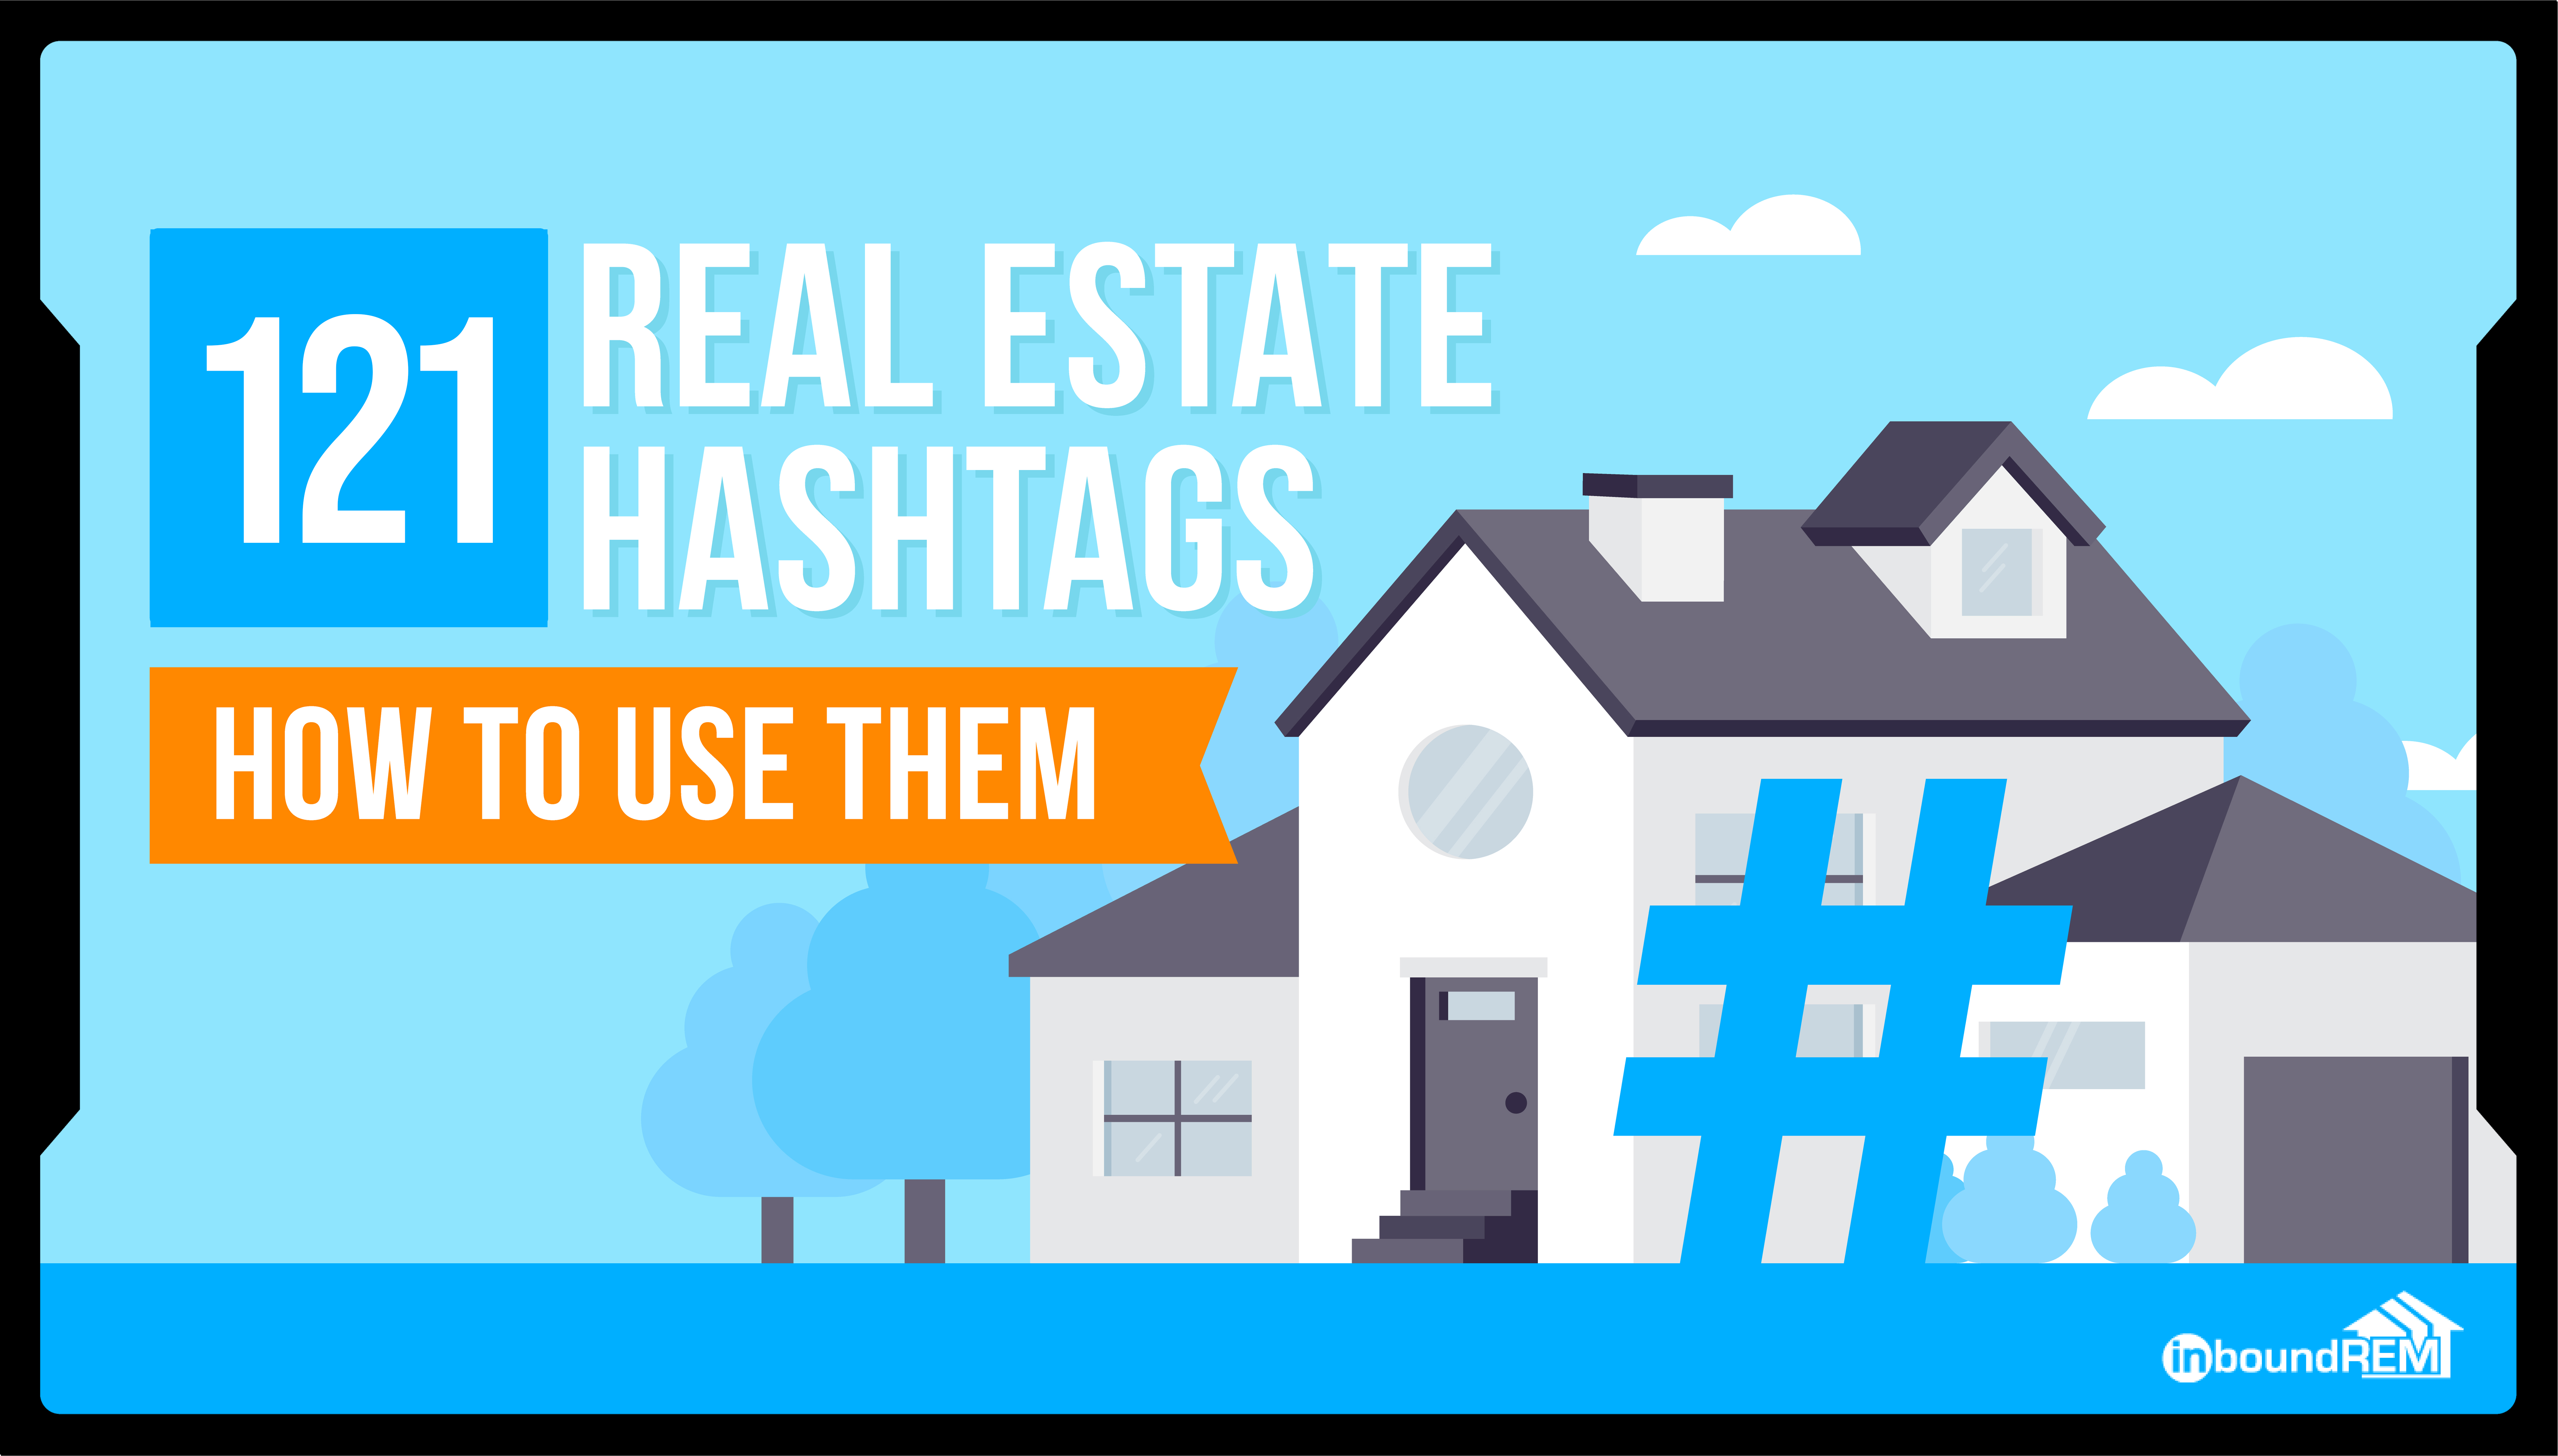 Title Image for a blog post on 50 real estate hash tags and how to use them